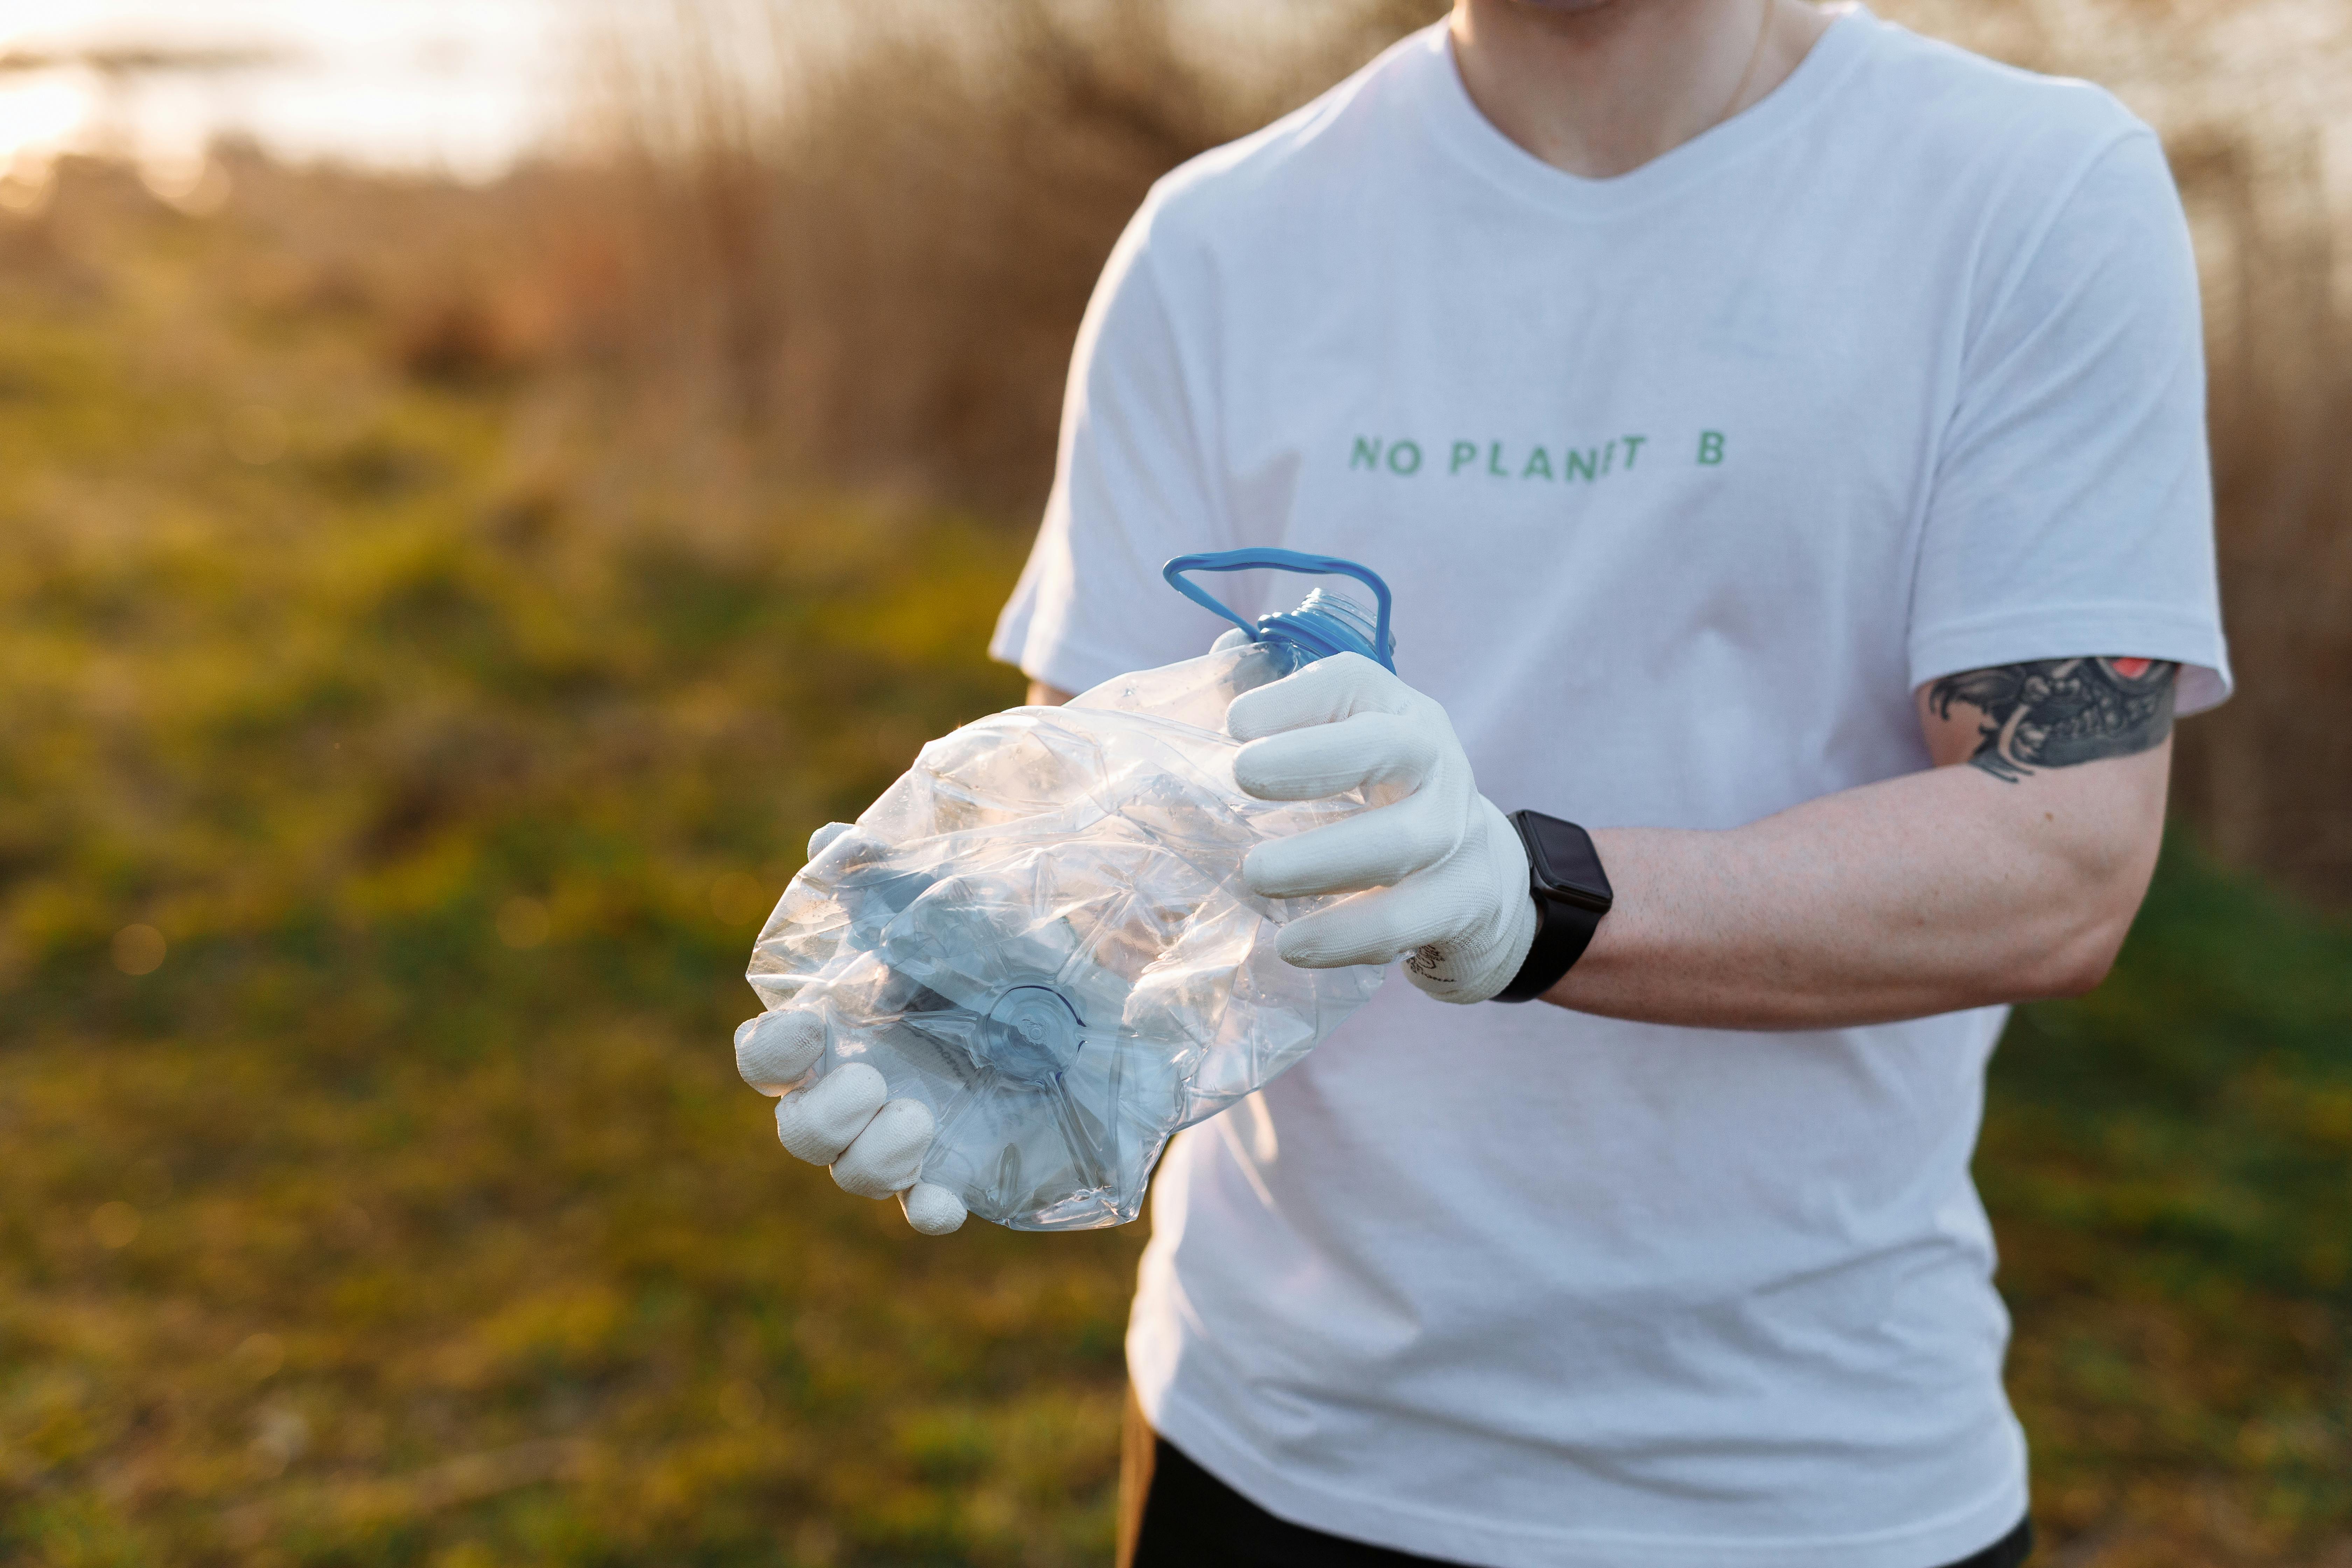 A person with gloves holding a crashed plastic bottle as part of recycling tutorials for lead magnets